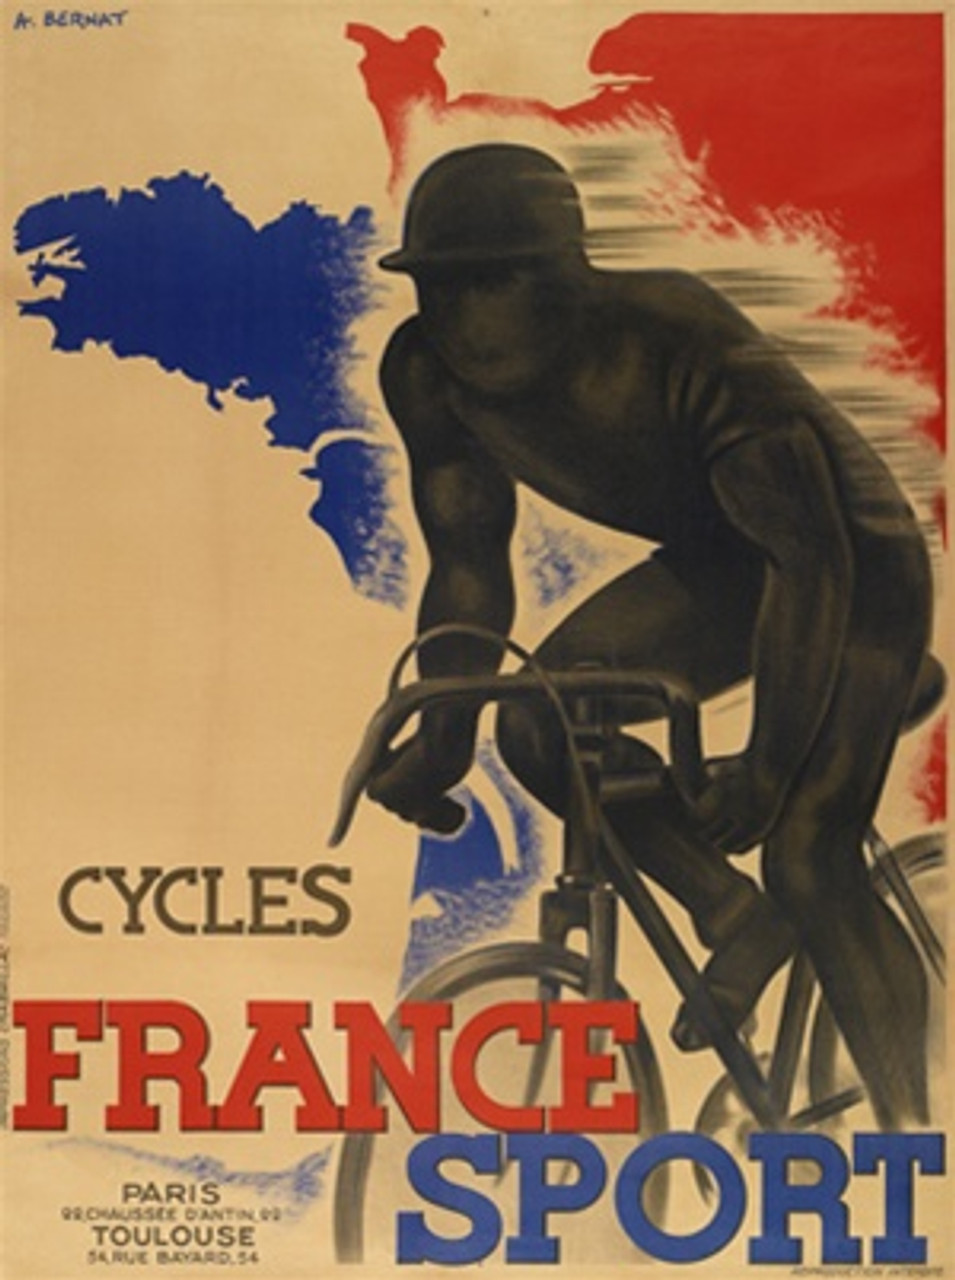 Cycles France Sport by A. Bernat 1920 France - Vintage Poster Reproductions. This French transportation poster features a shadowy cyclist racing past a background with a blue and red France against off white. Giclee Advertising Print. Classic Posters